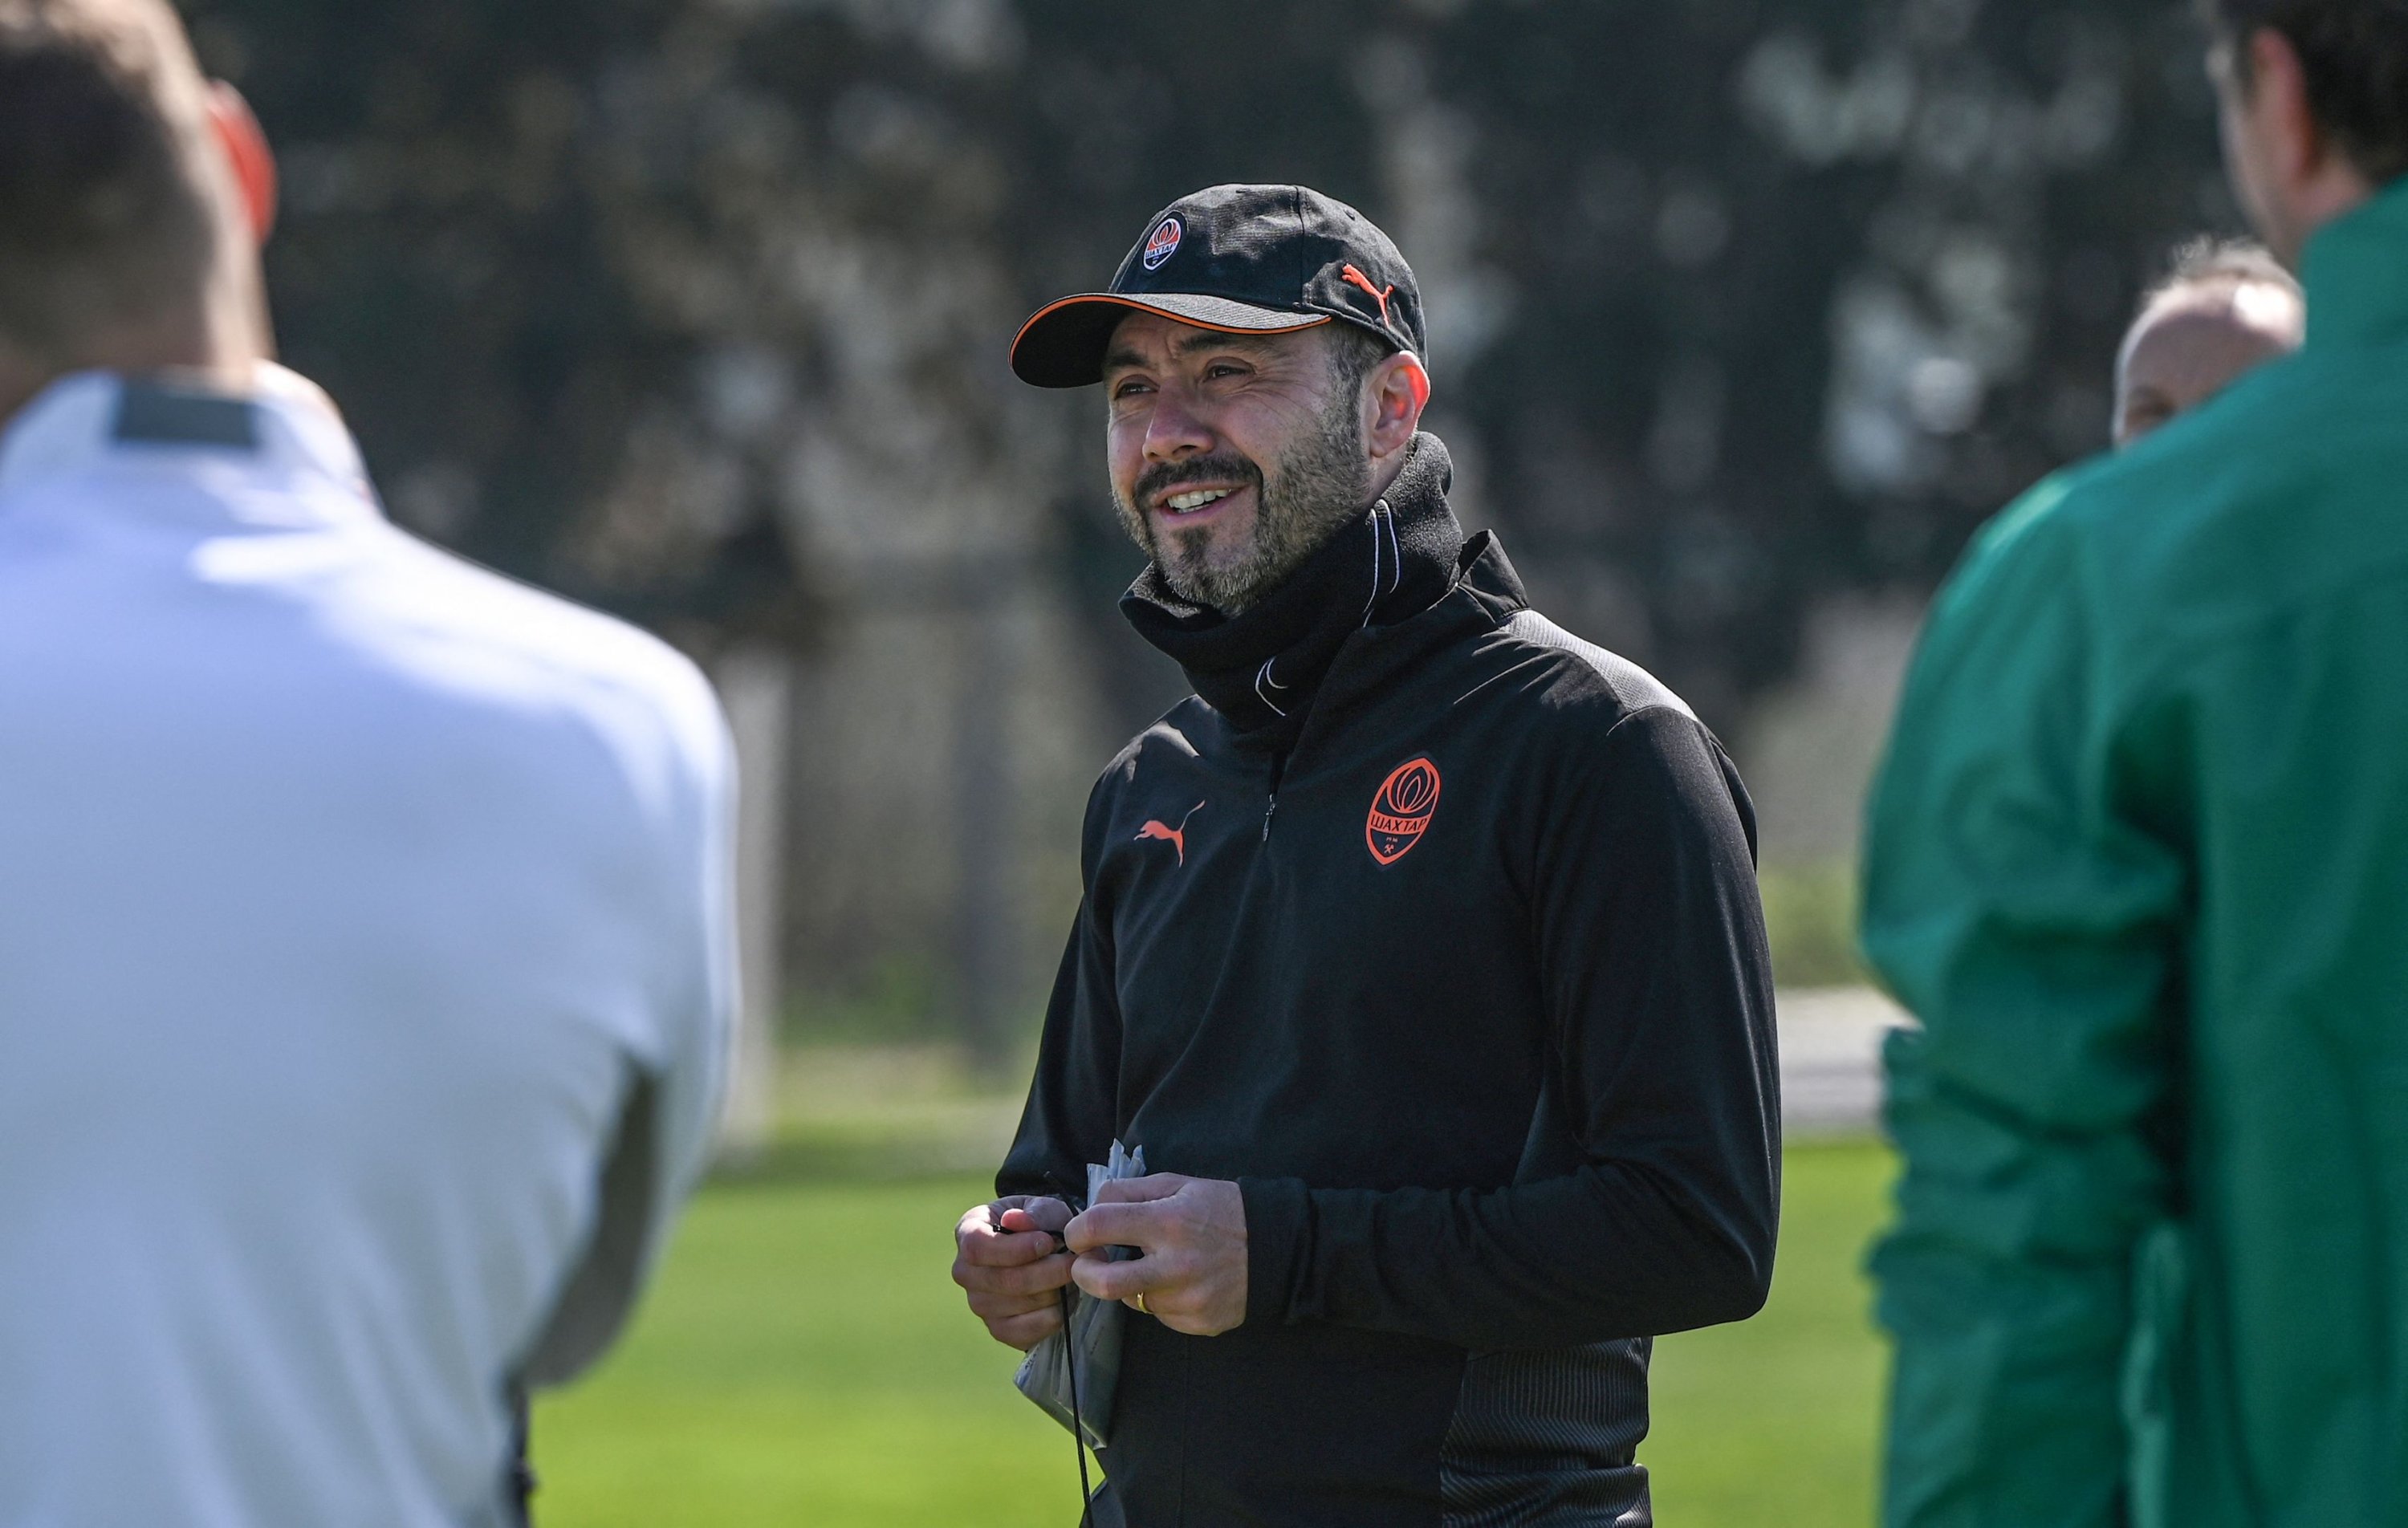 Shakhtar Donetsk's Italian head coach Roberto De Zerbi speaks during a training session at the Turkish Football Federation's (TFF) facilities, Istanbul, Turkey, April 13, 2022. (AFP Photo)